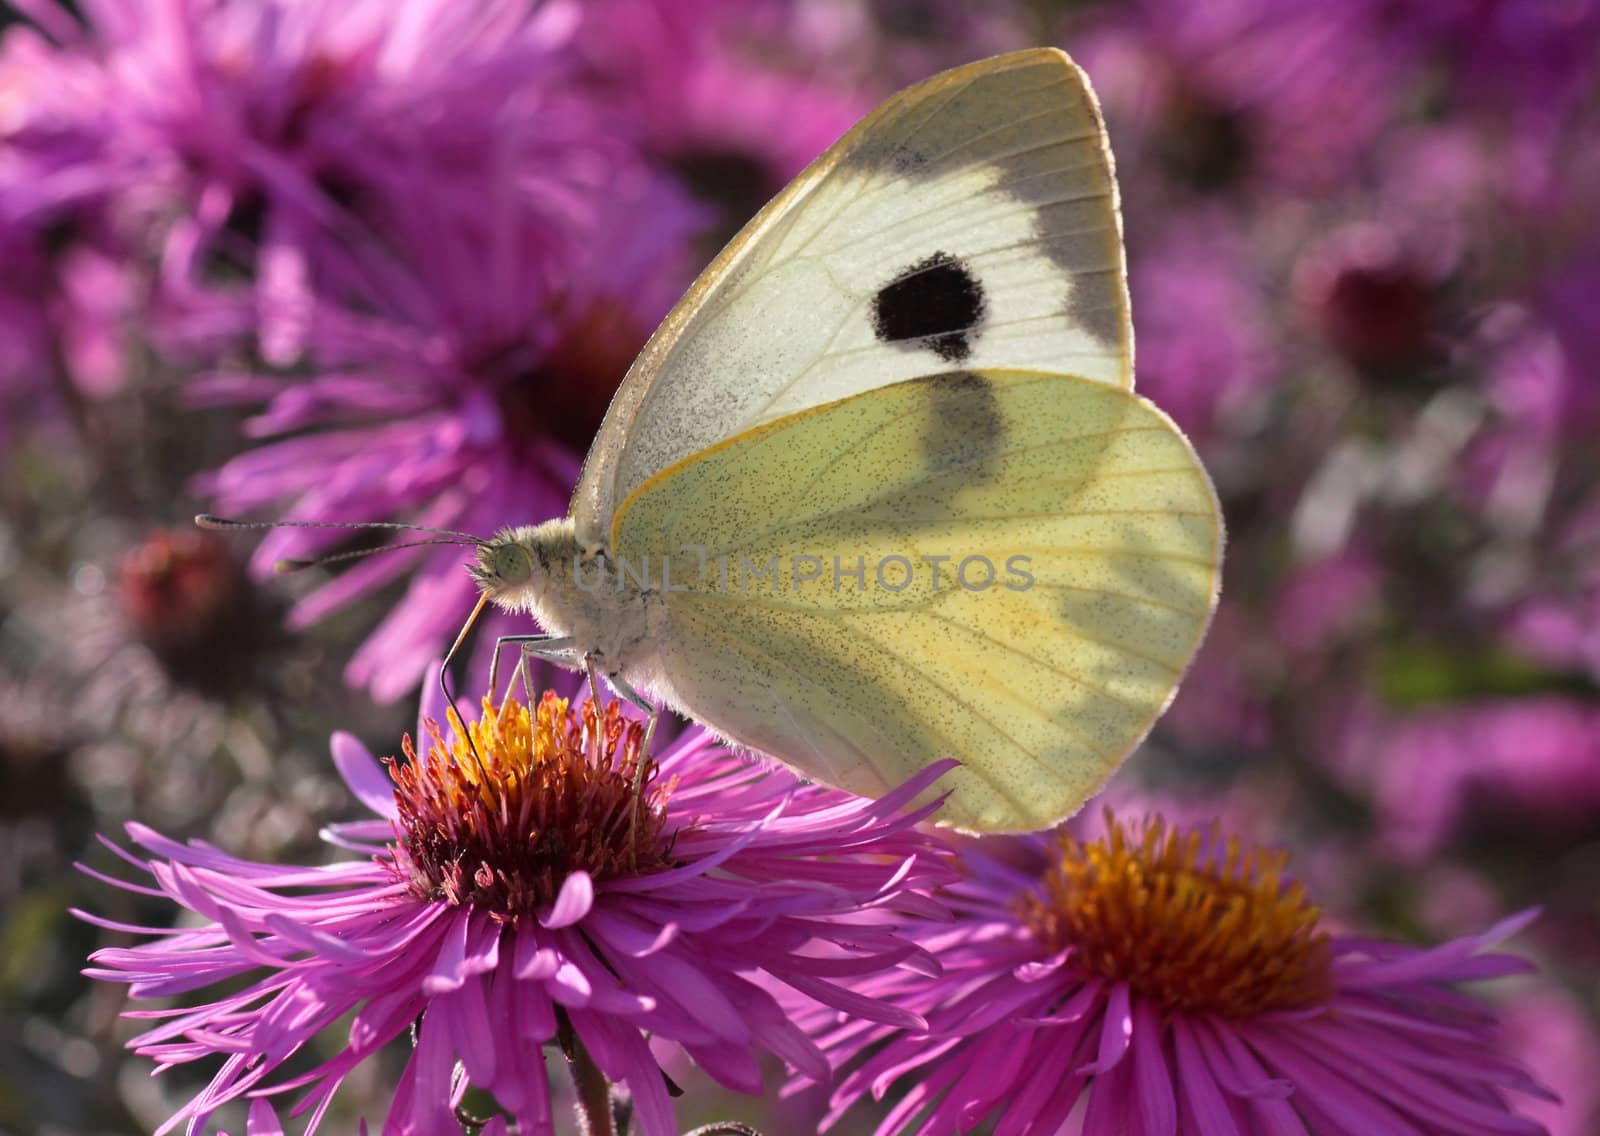 white cabbage butterfly on flower (chrysanthemum)